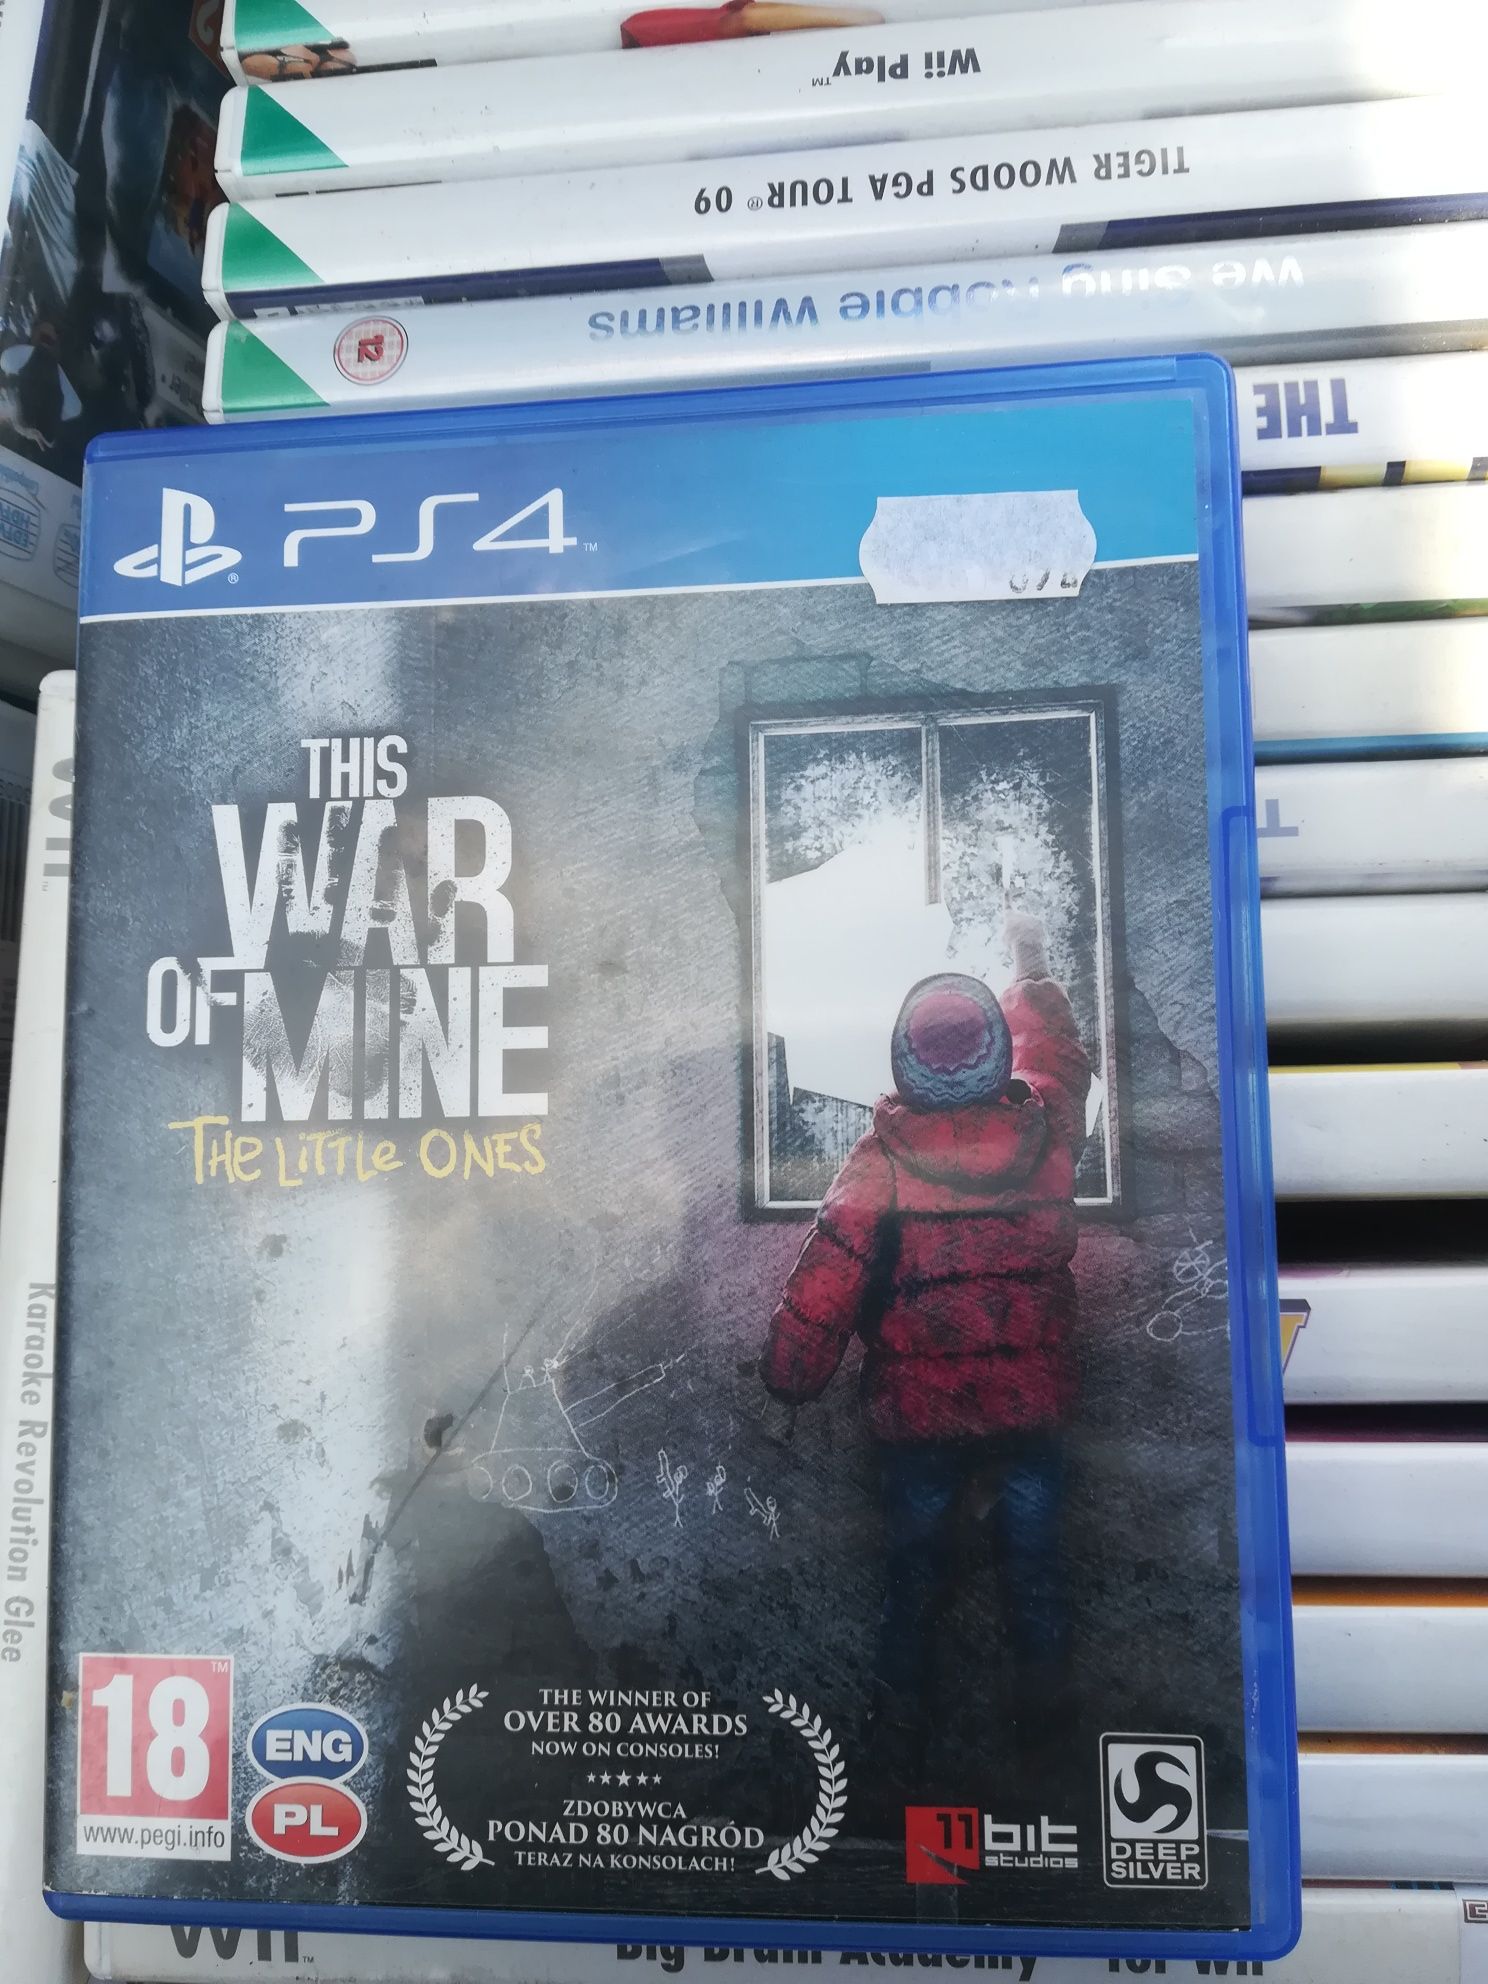 This war of mine the Little ones PL ps4 ps5 PlayStation 4 5